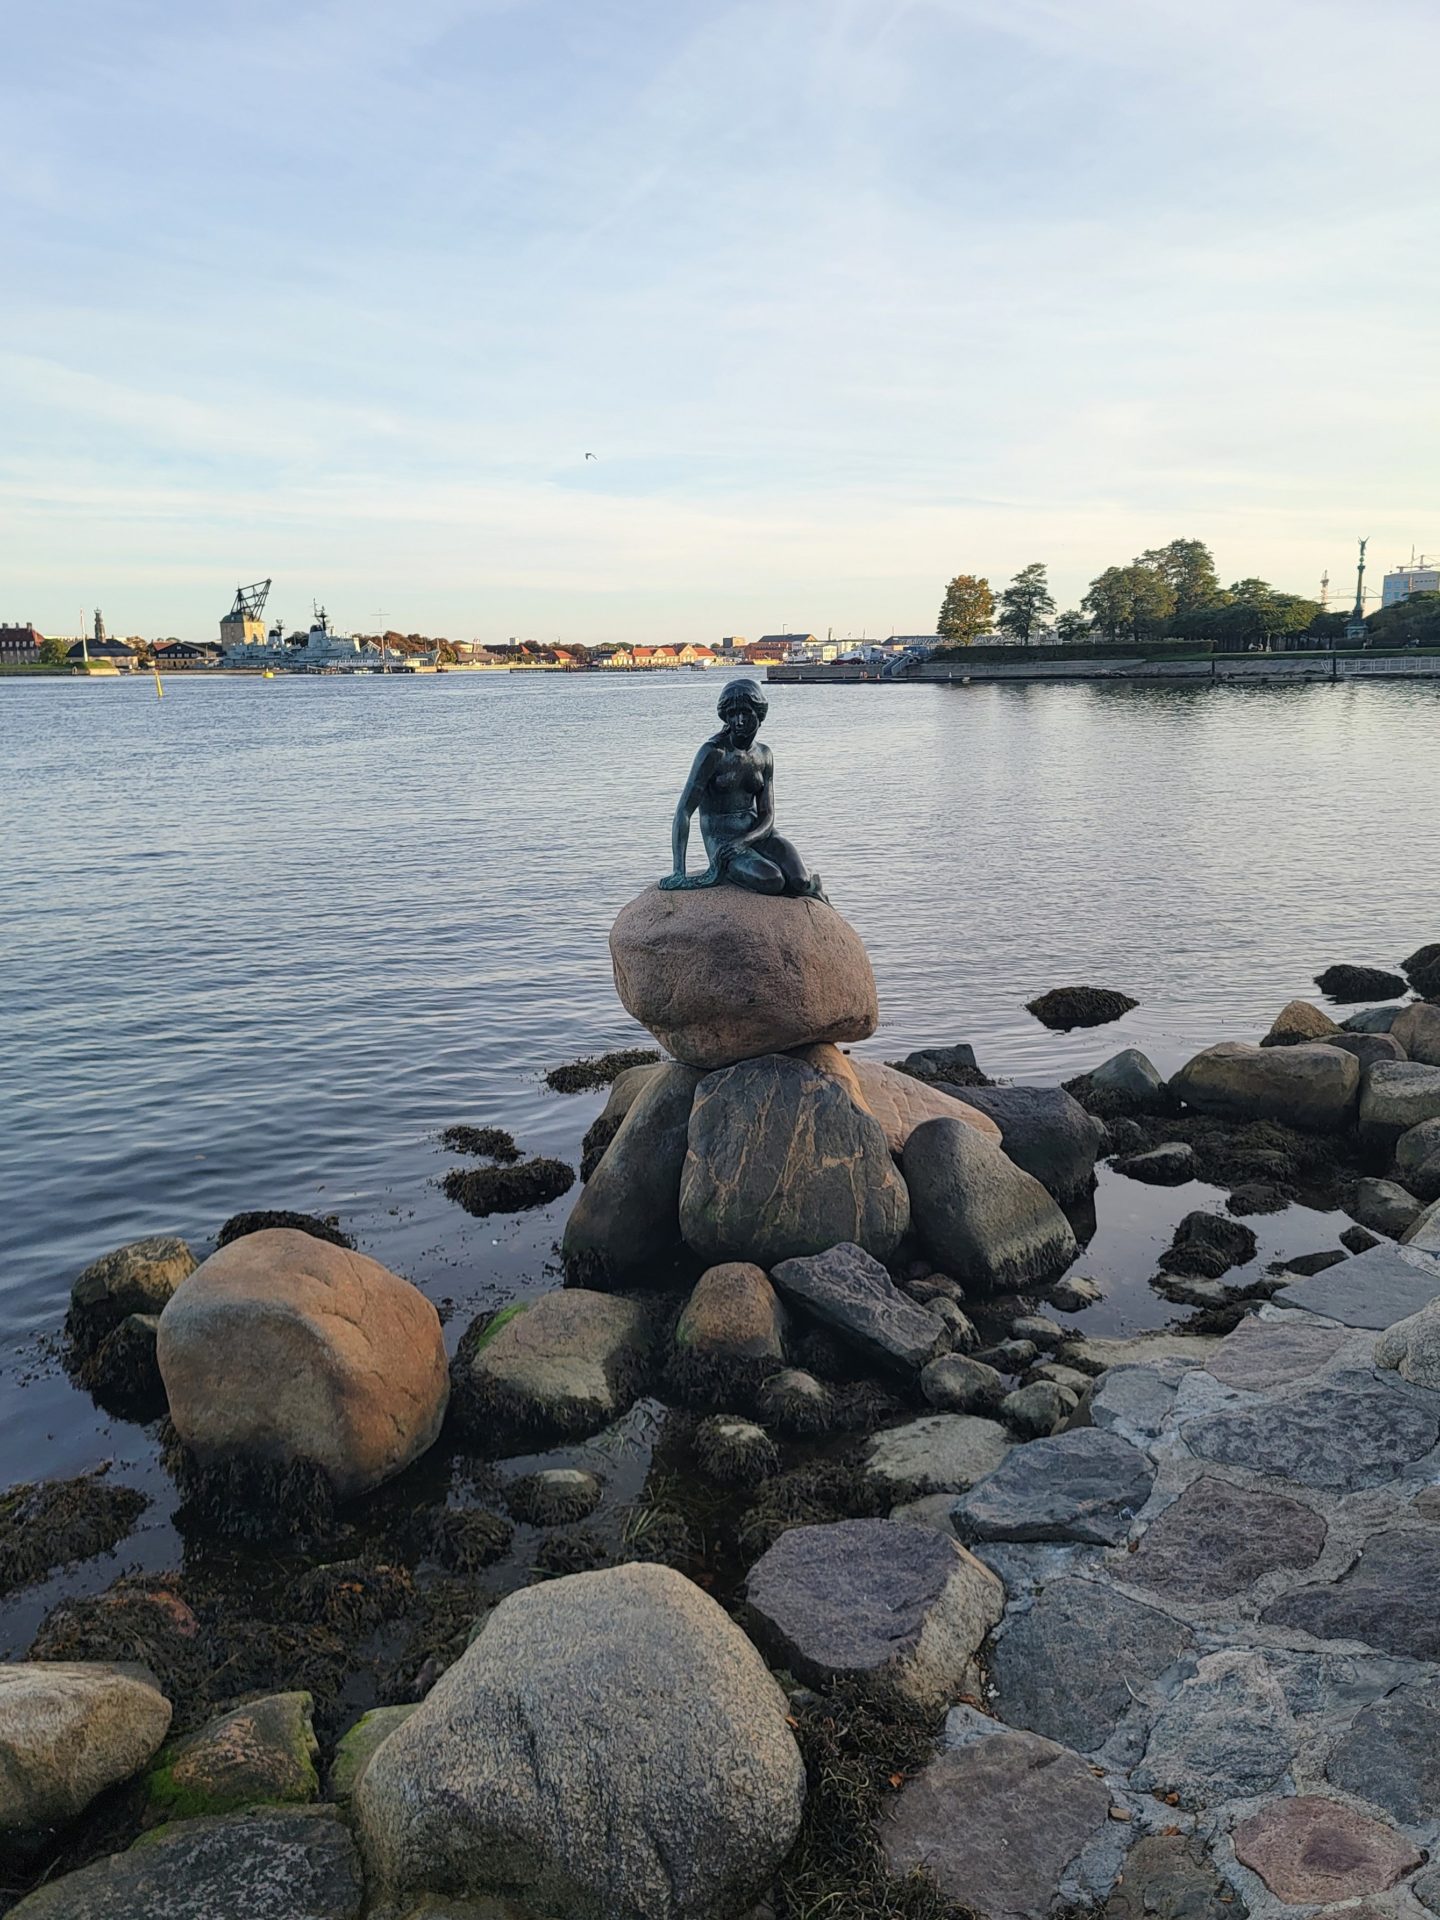 a statue of a mermaid on a rock by a body of water with The Little Mermaid in the background